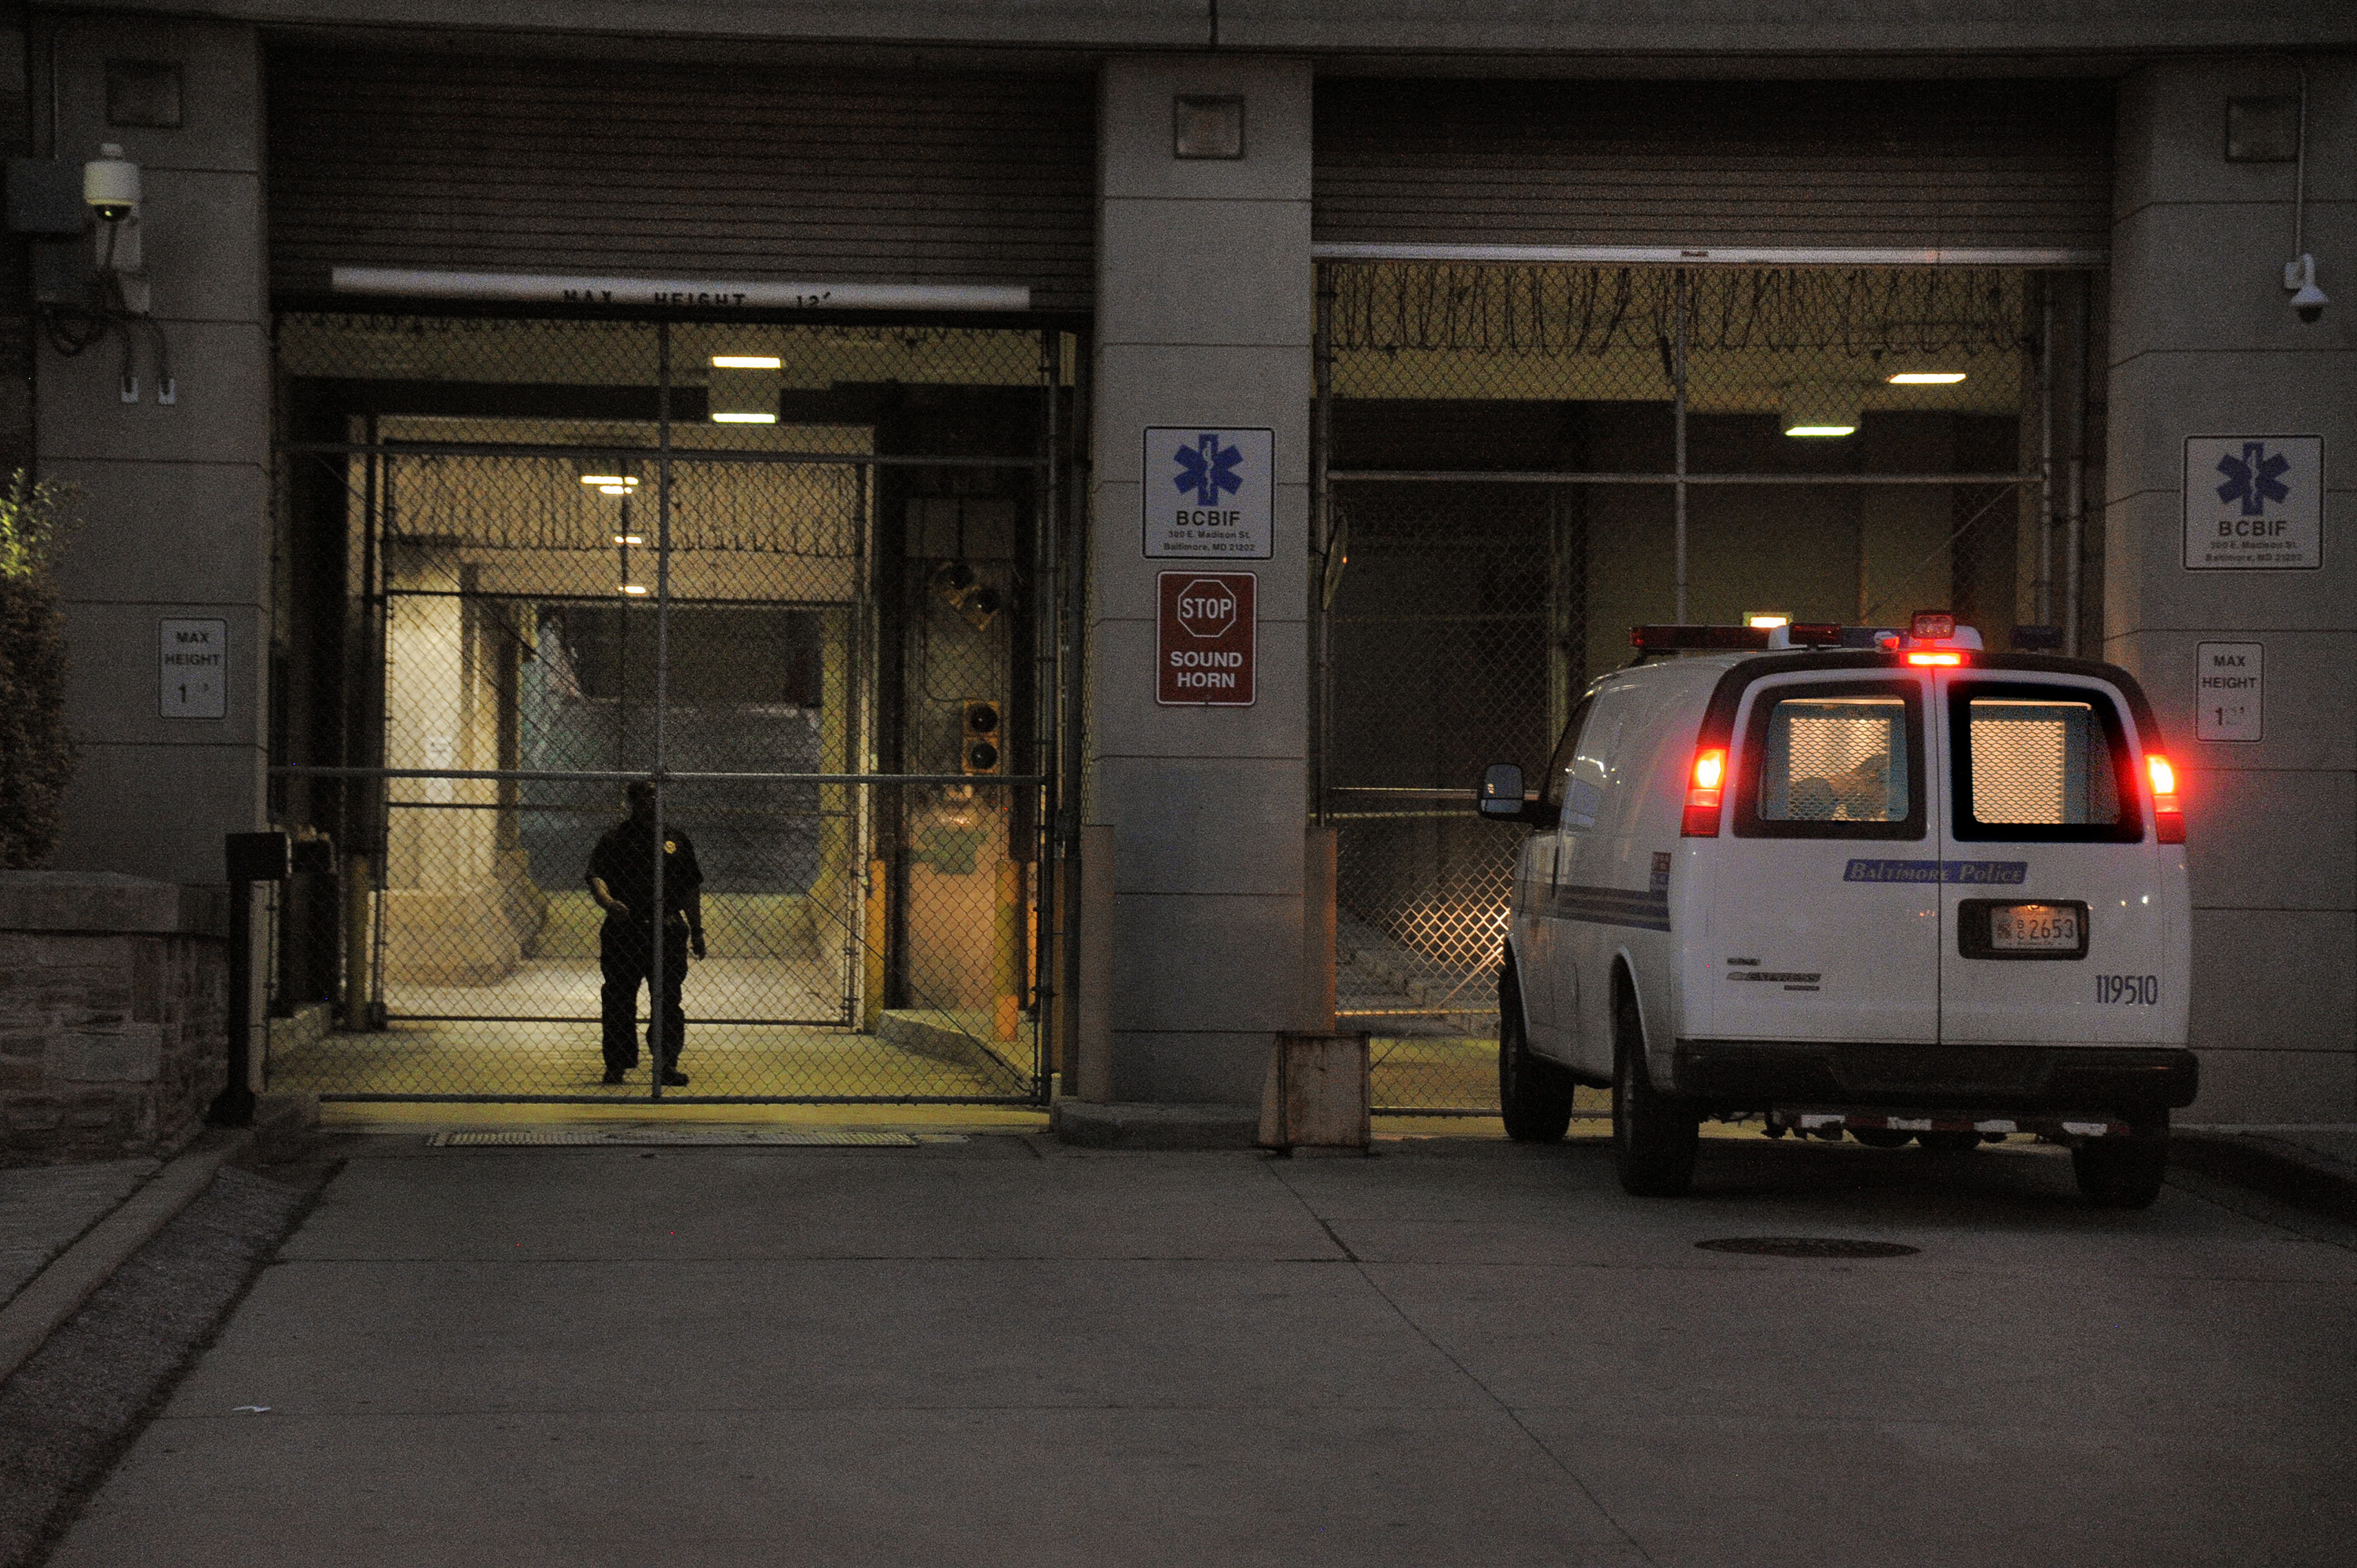 A Baltimore Police transfer van pulls into the Baltimore Central Booking and Intake Center on May 7, 2015. (Karl Merton Ferron—Baltimore Sun/TNS/Getty Images)